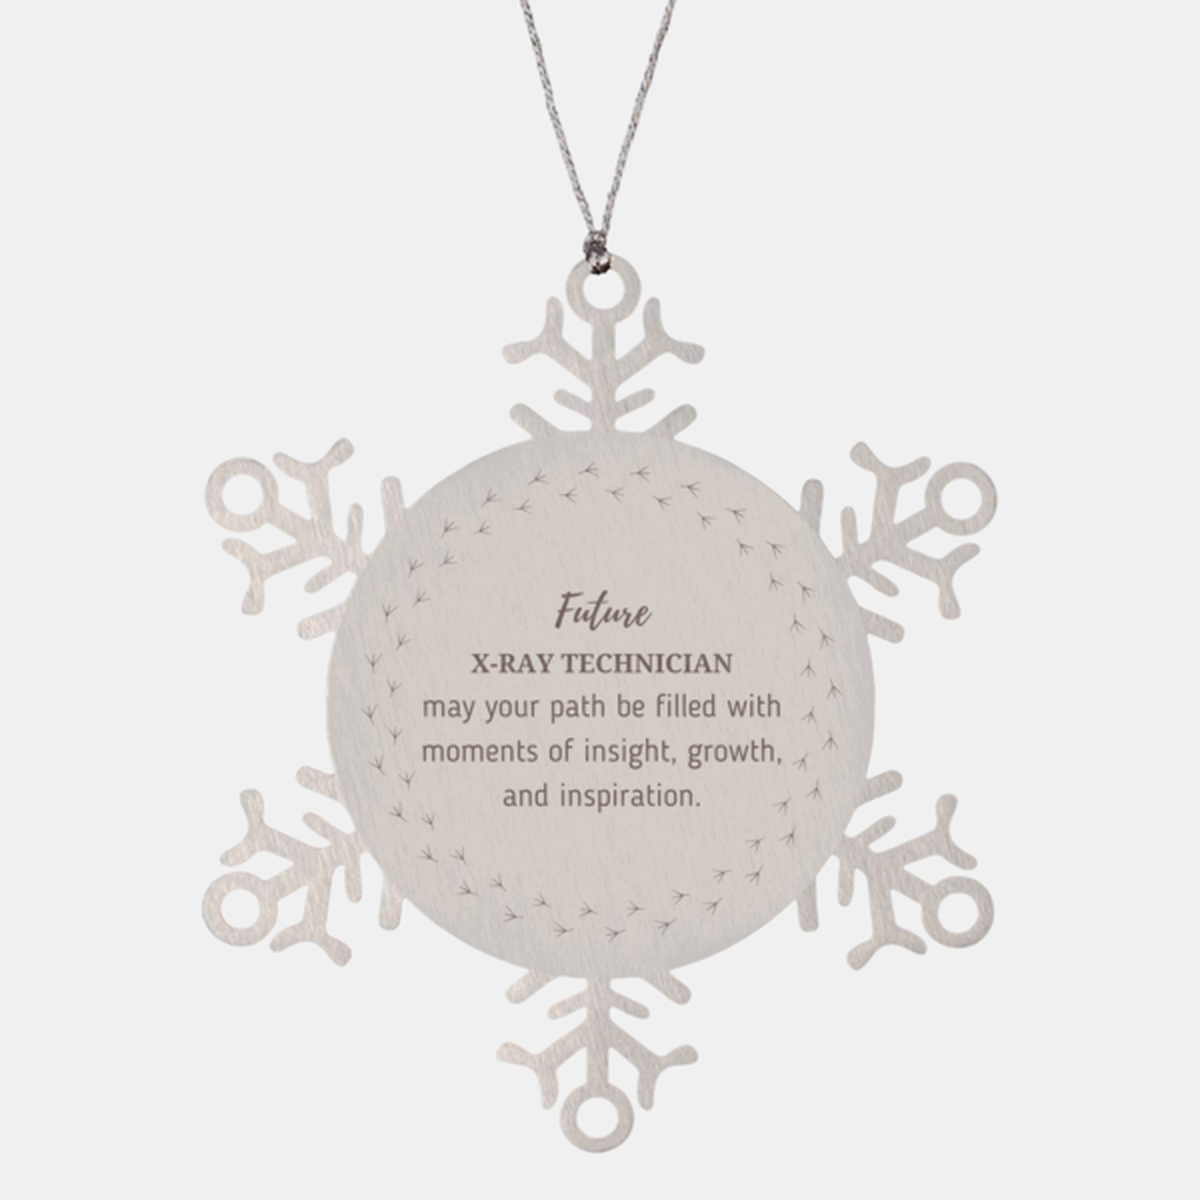 Future X-Ray Technician Gifts, May your path be filled with moments of insight, Graduation Gifts for New X-Ray Technician, Christmas Unique Snowflake Ornament For Men, Women, Friends